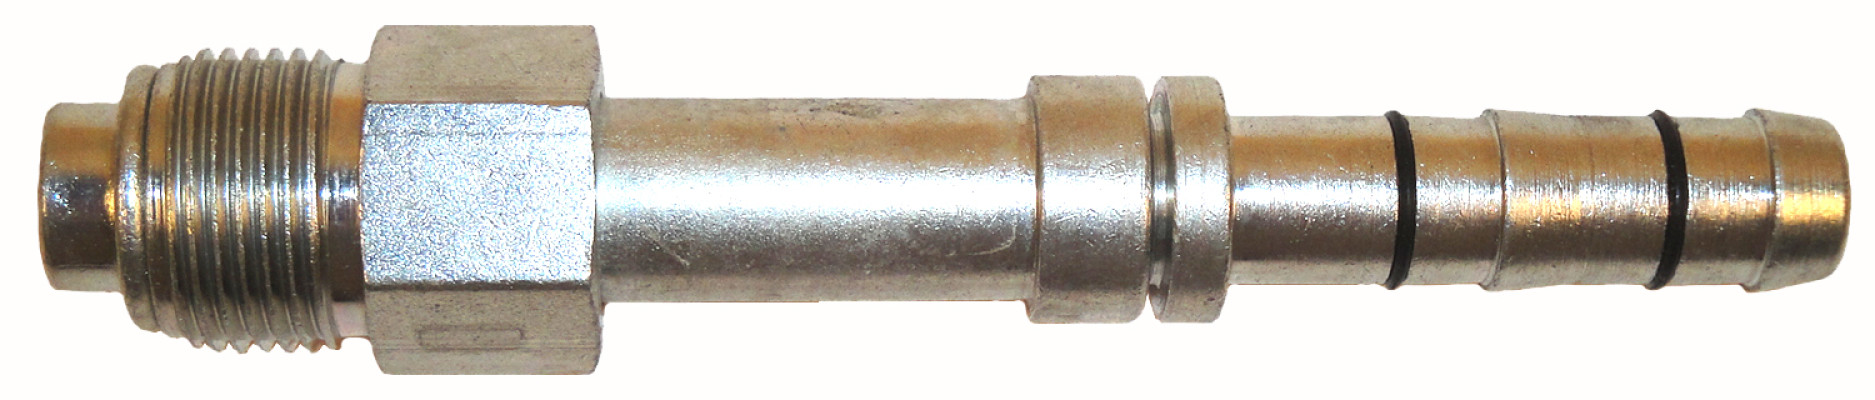 Image of A/C Refrigerant Hose Fitting from Sunair. Part number: FJ3052-0808S